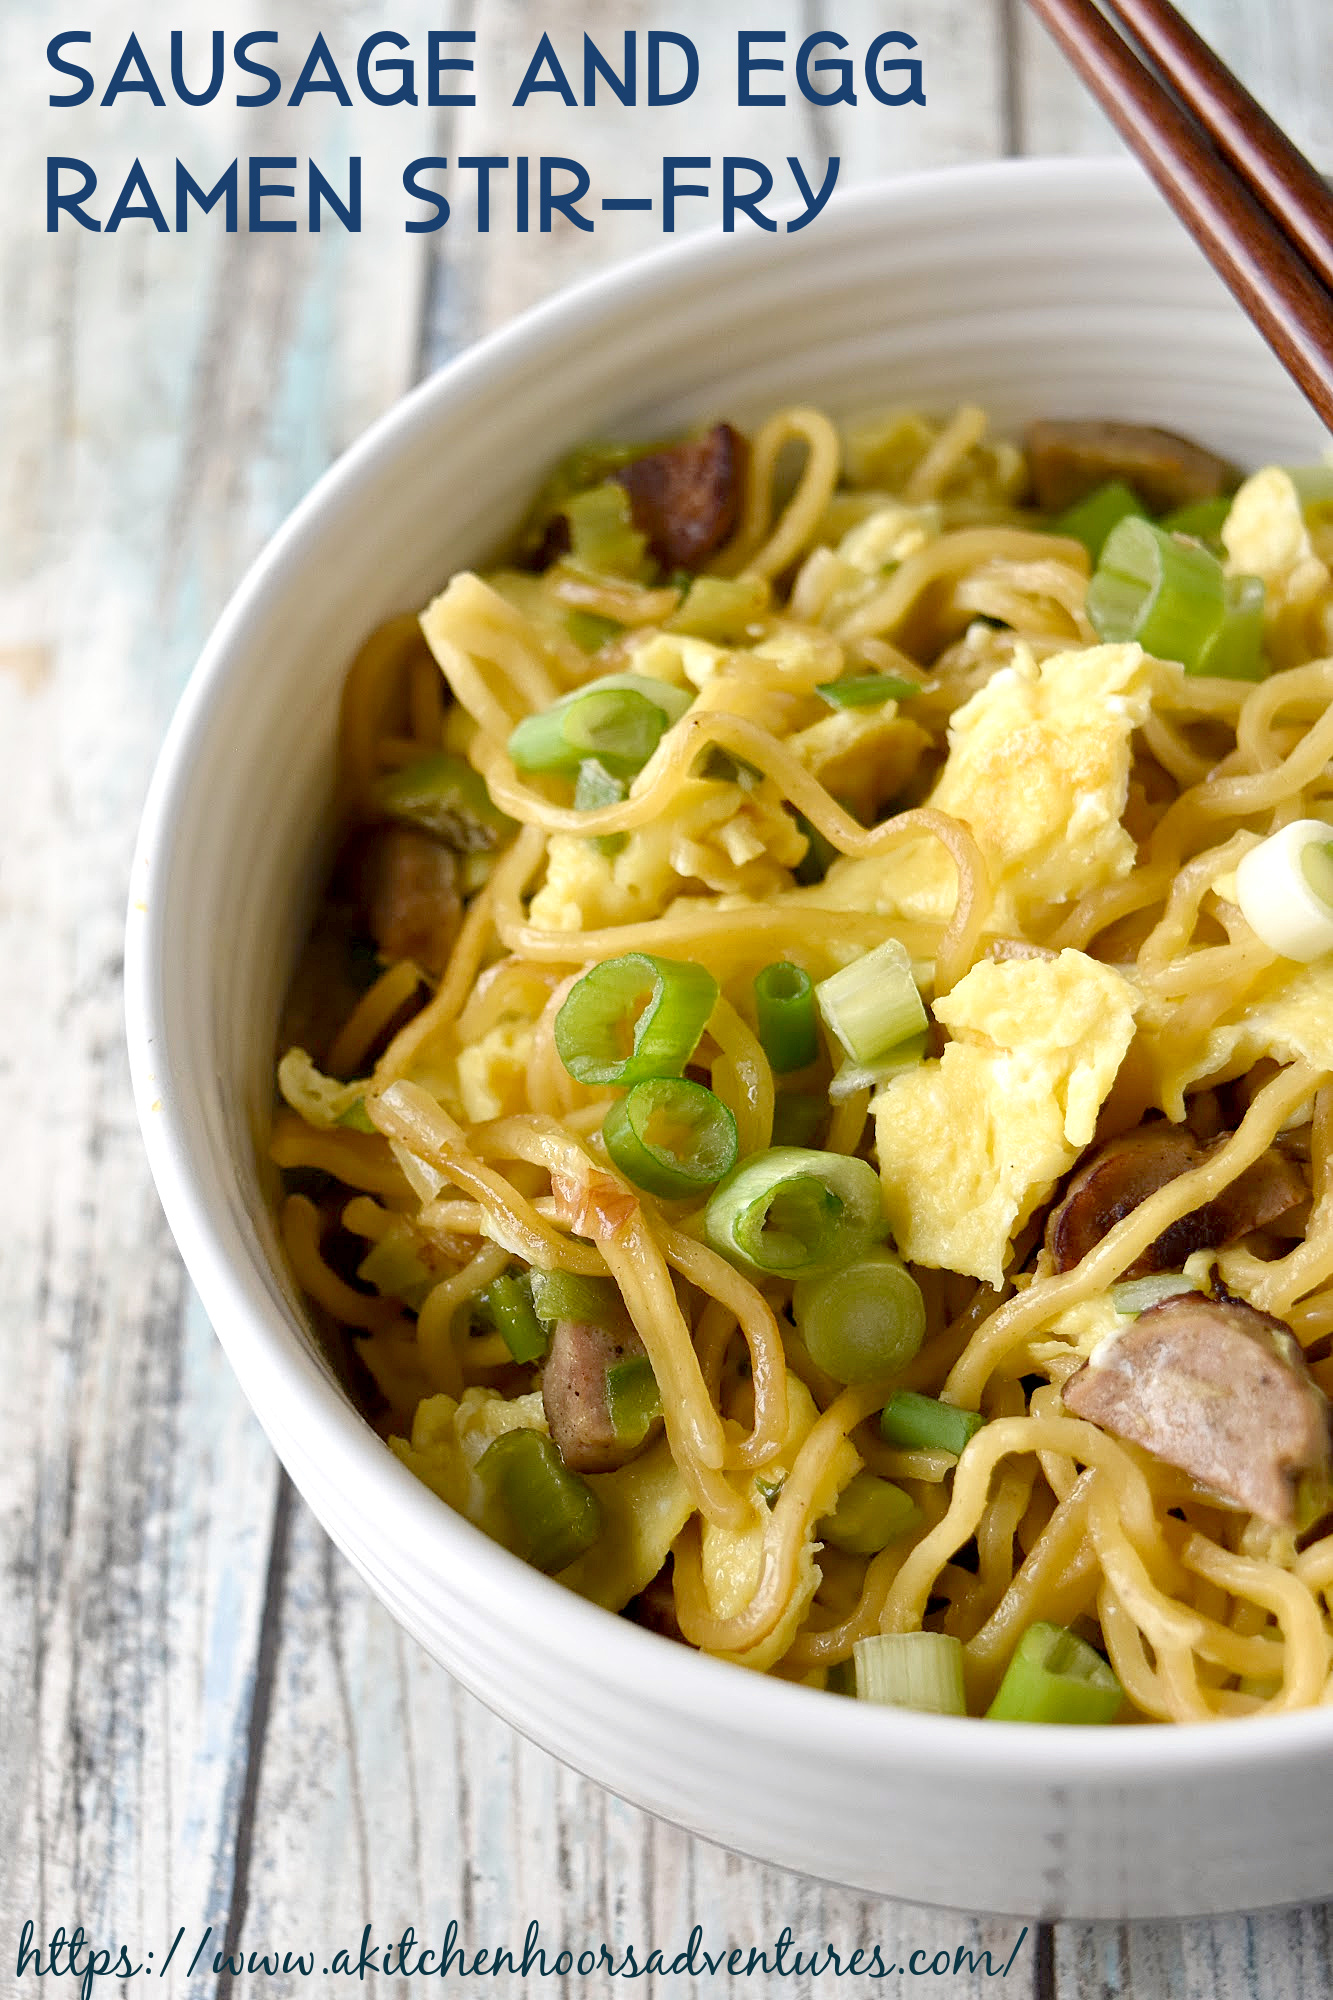 Sausage and Egg Breakfast Ramen is quick, easy, and super delicious! There are no rules to stir fry!  This is an American twist on ramen stir fry that has eggs, sausage, and veggies. #cooklikeawokstar, #norulestostirfry, #fortunerecipechallenge